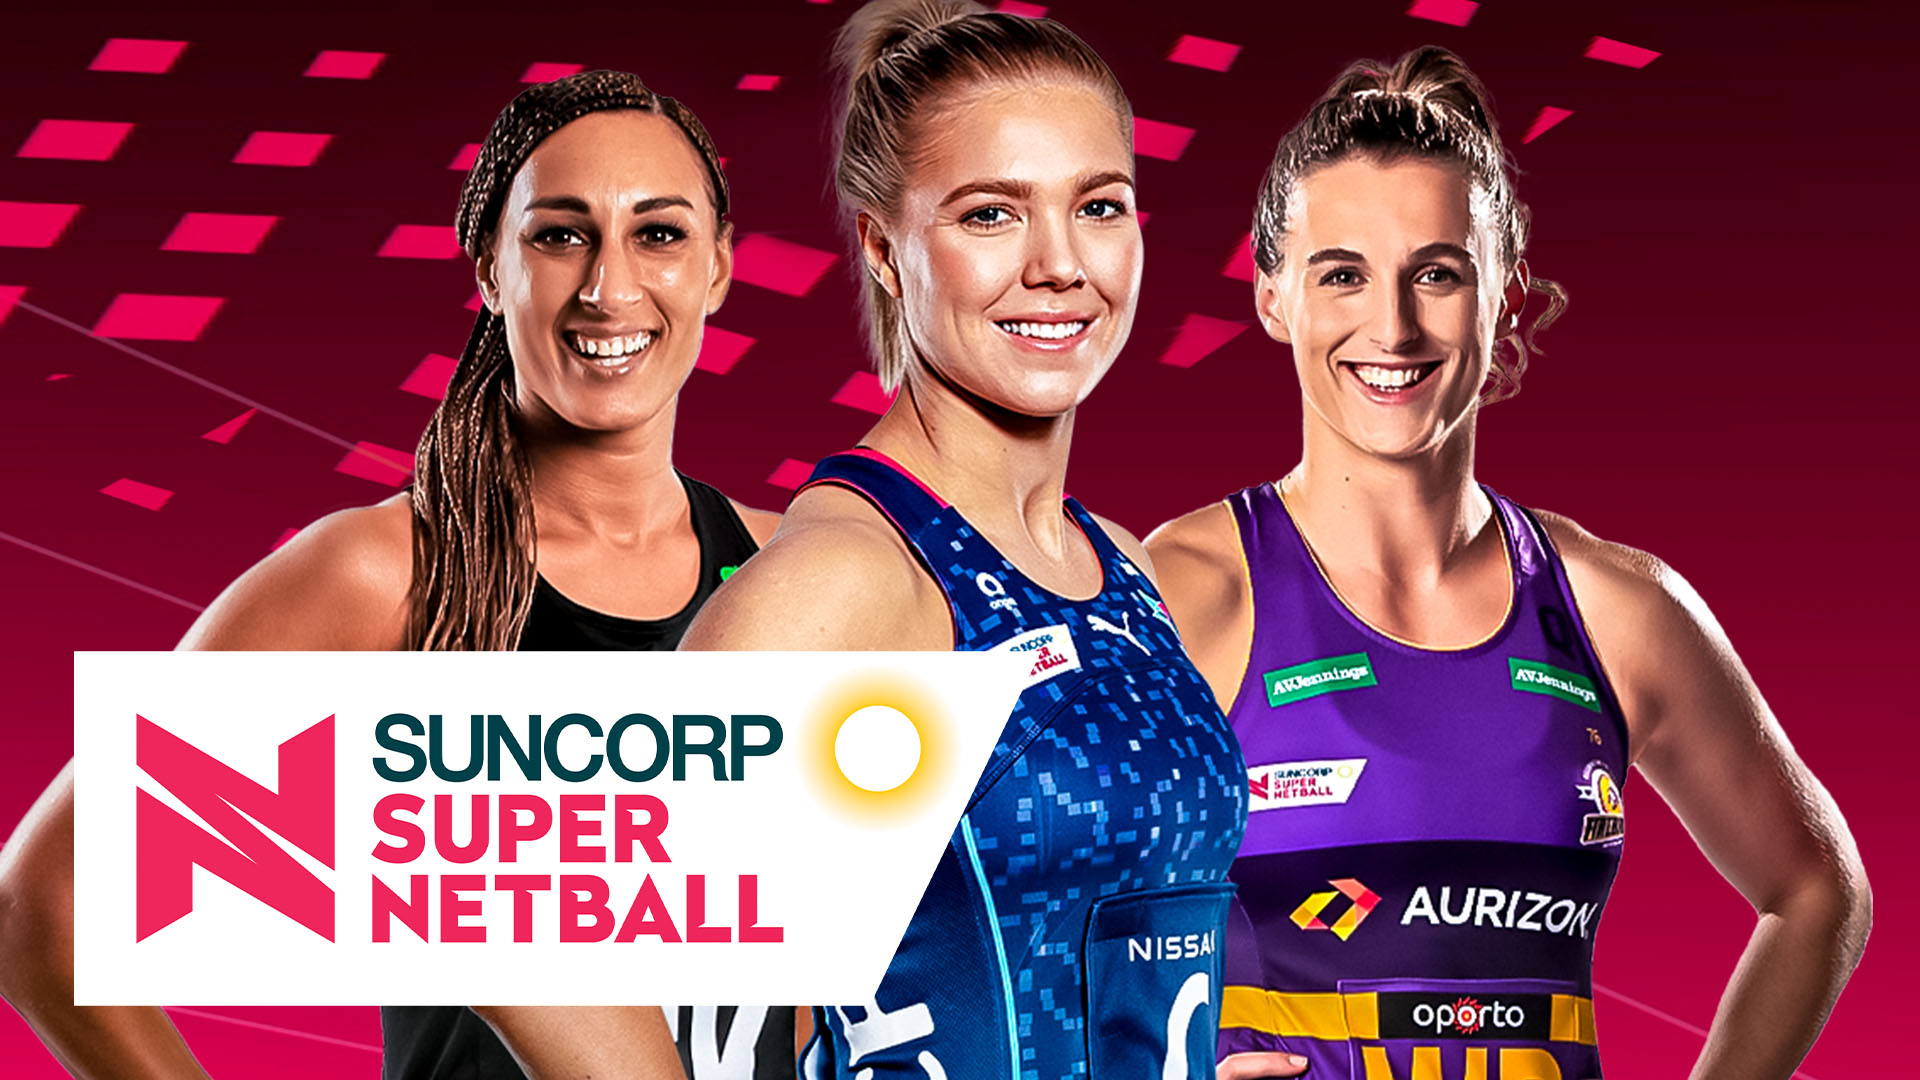 Watch Suncorp Super Netball live or ondemand Freeview Australia